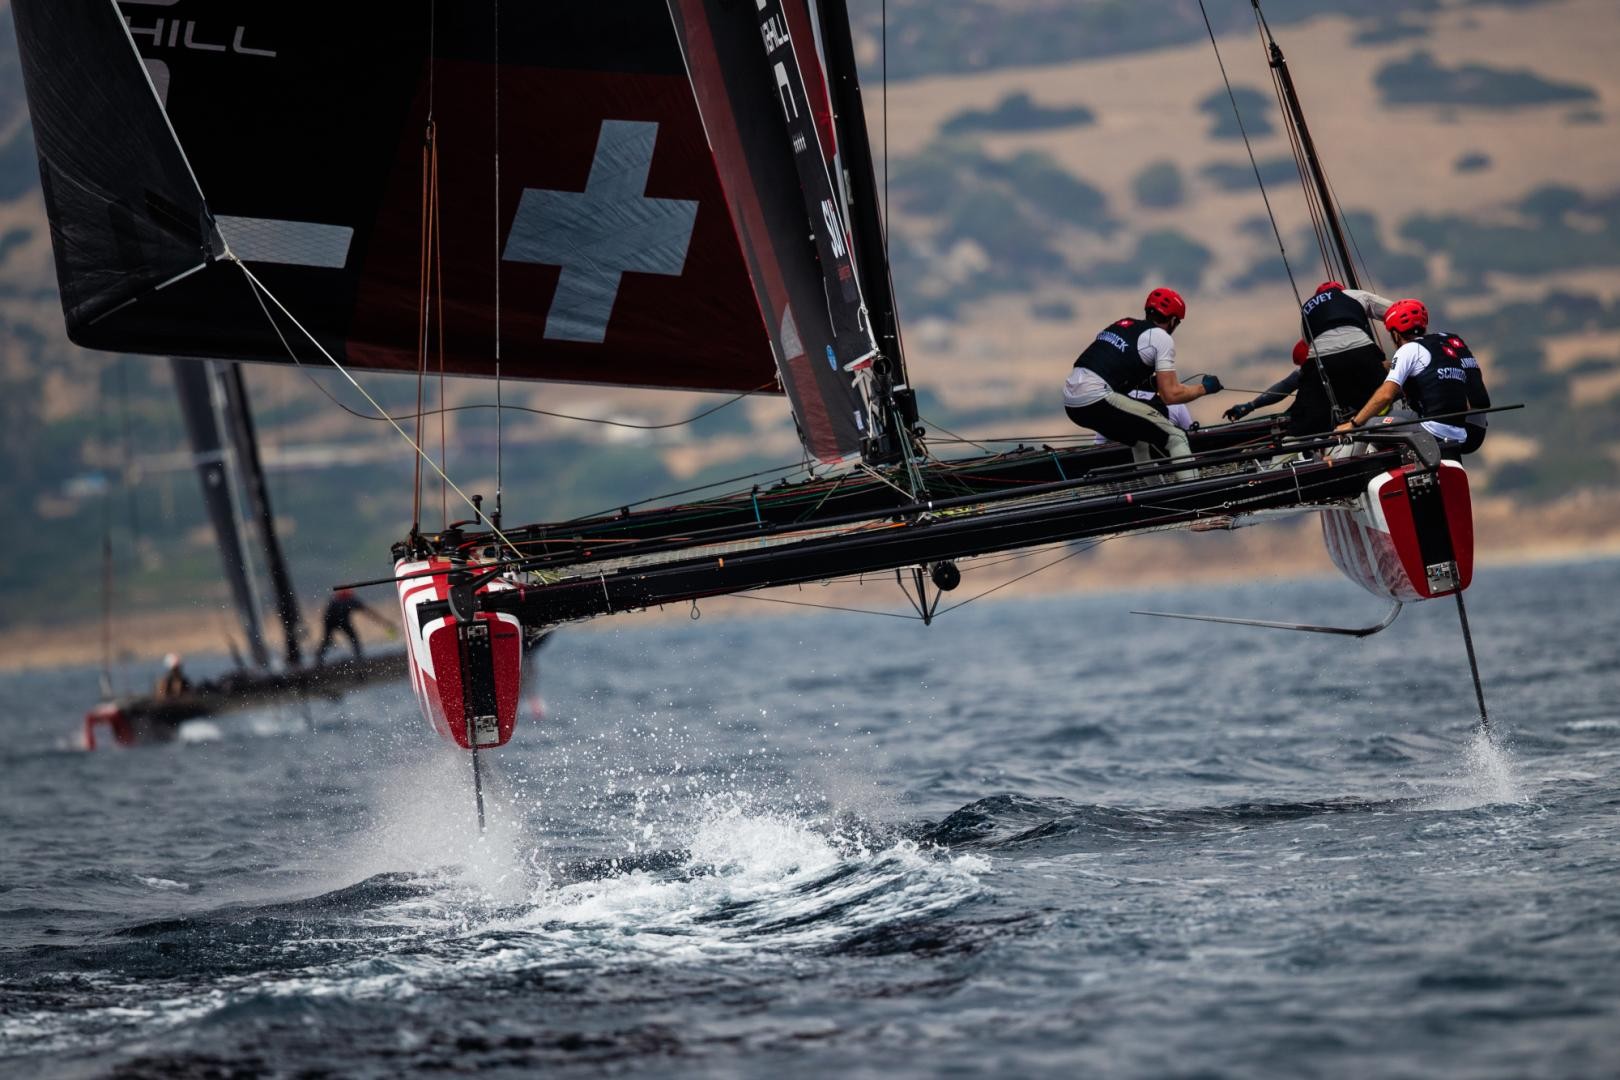 The defending champions Alinghi were OCS in the first race but comfortably led both attempts at a race two. Photo: Sailing Energy / GC32 Racing Tour